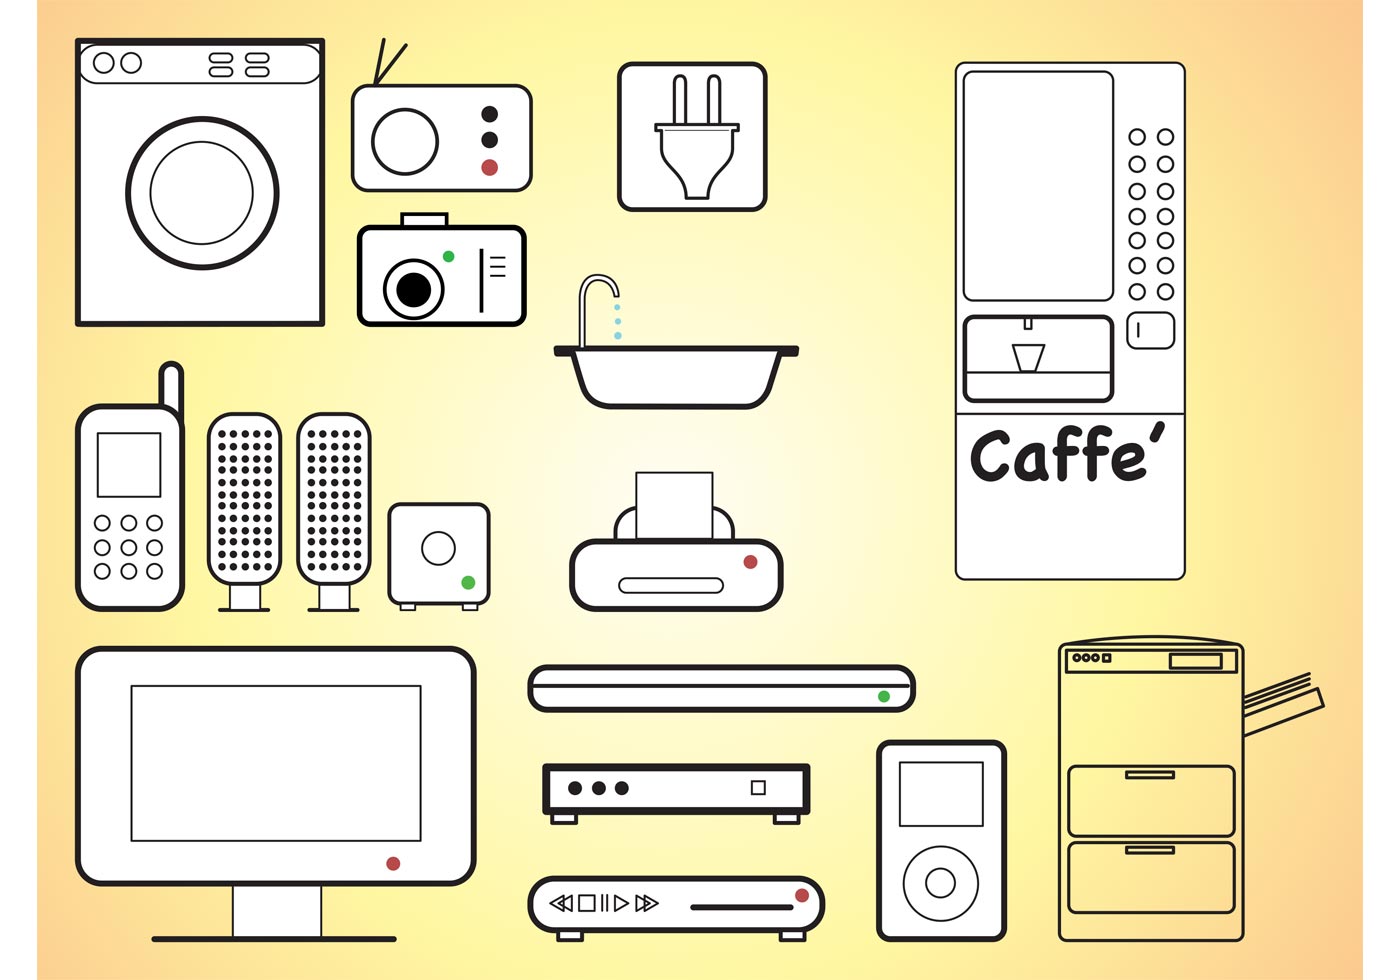 Download Home Appliances - Download Free Vector Art, Stock Graphics ...